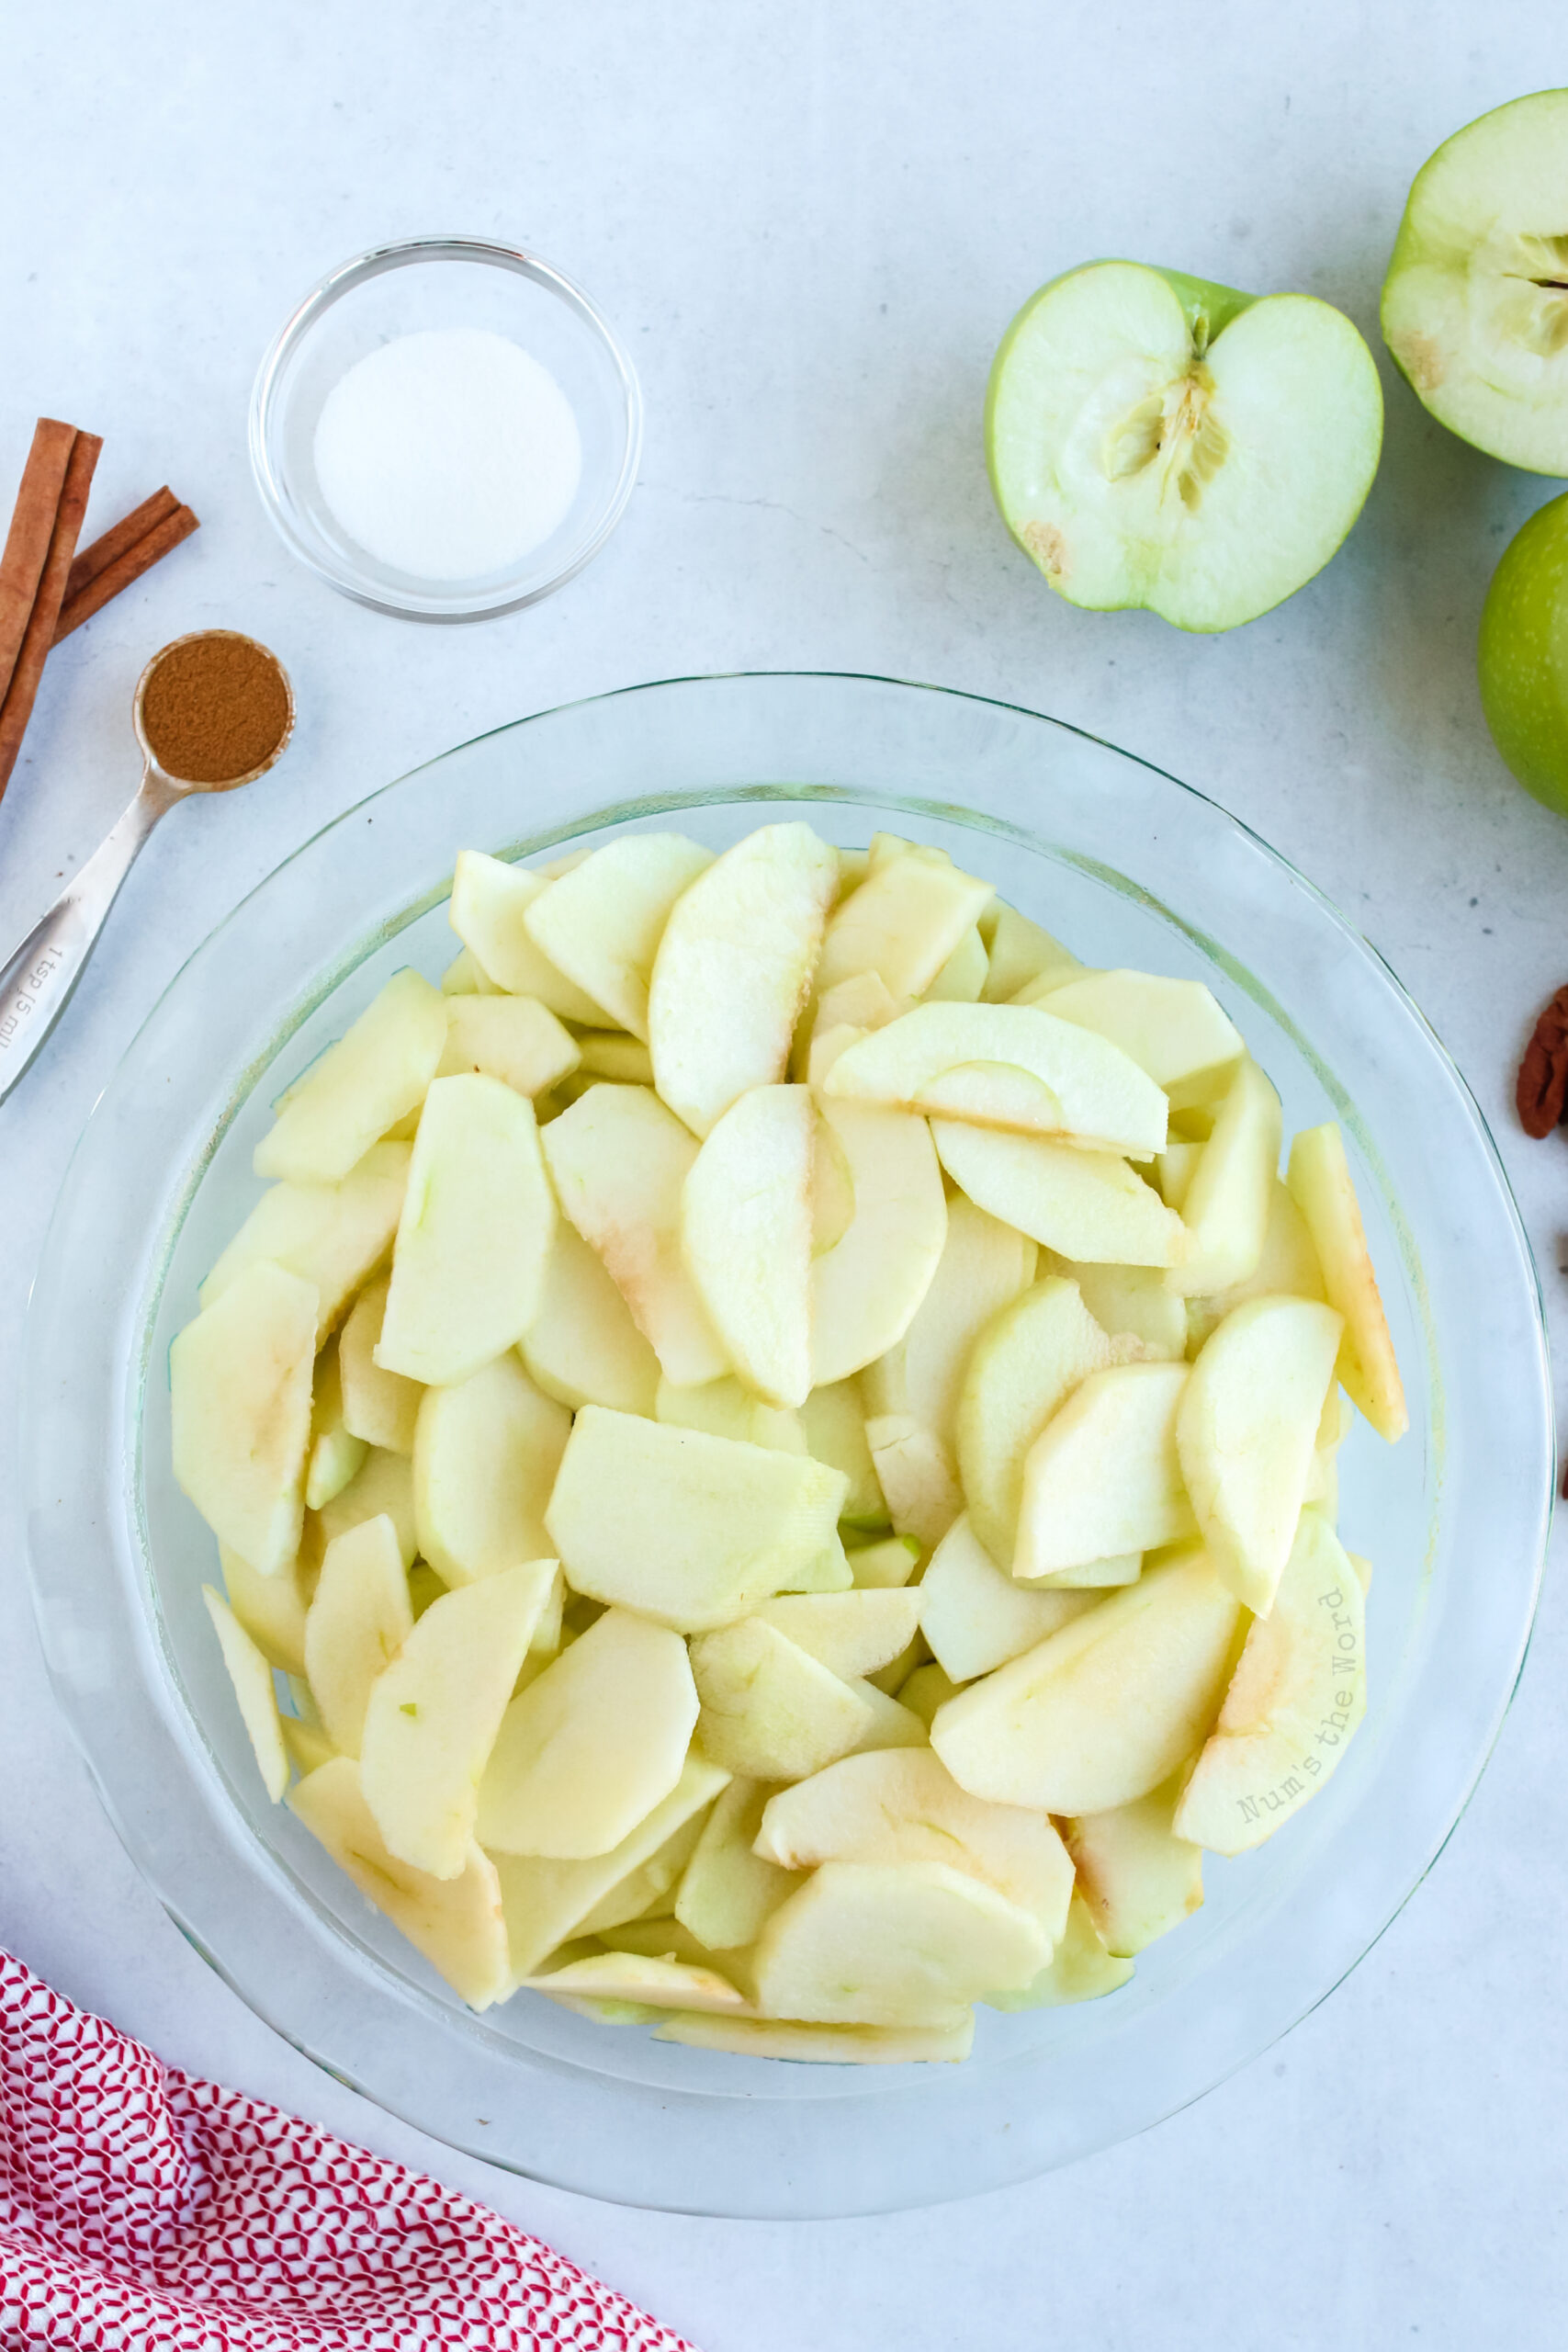 Sliced apples in a pie plate